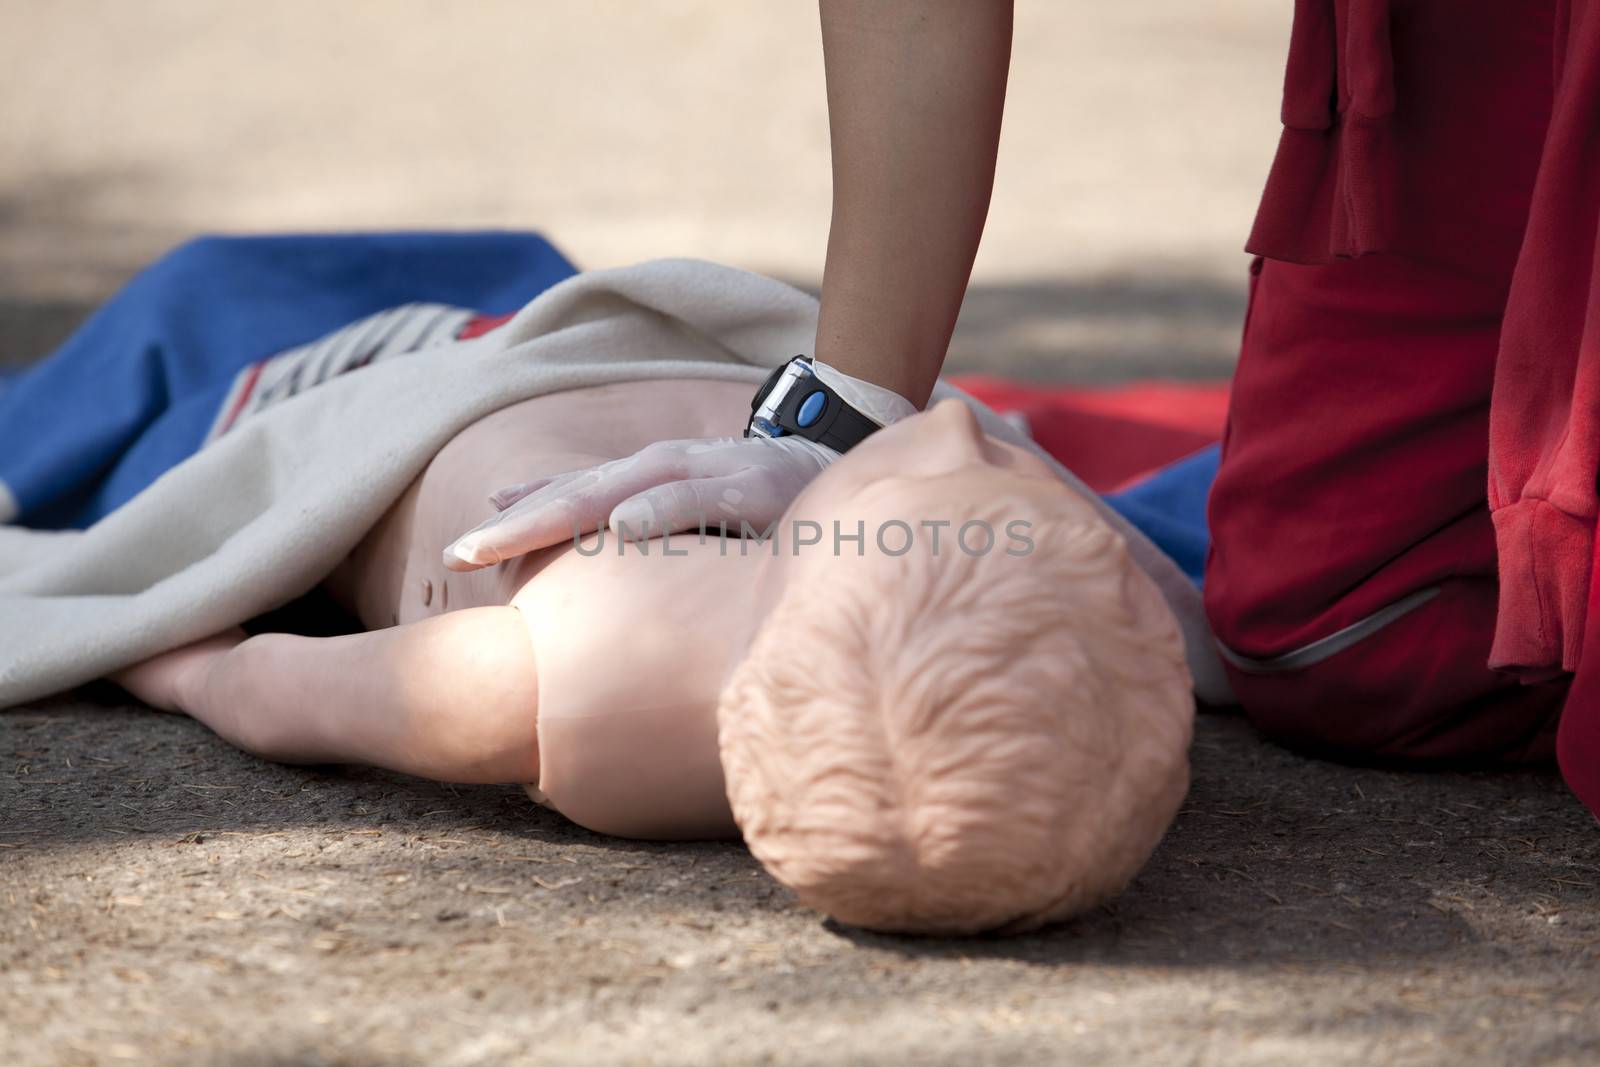 CPR practice on dummy by wellphoto